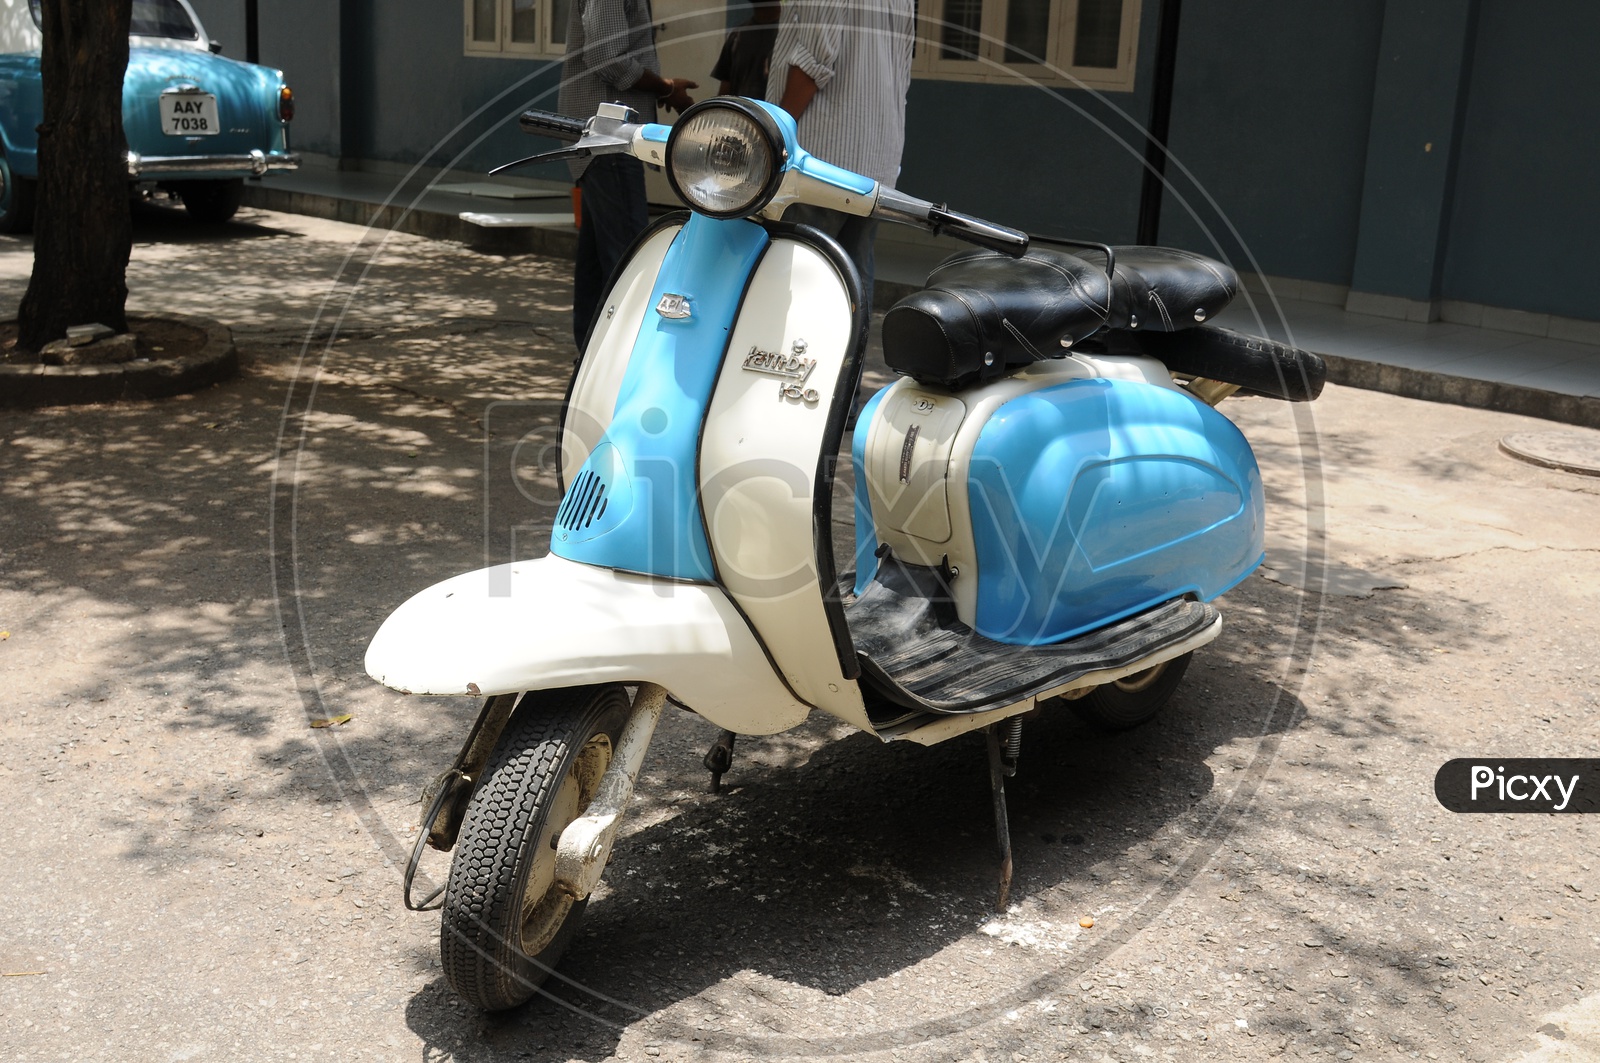 An Old Vintage Scooter